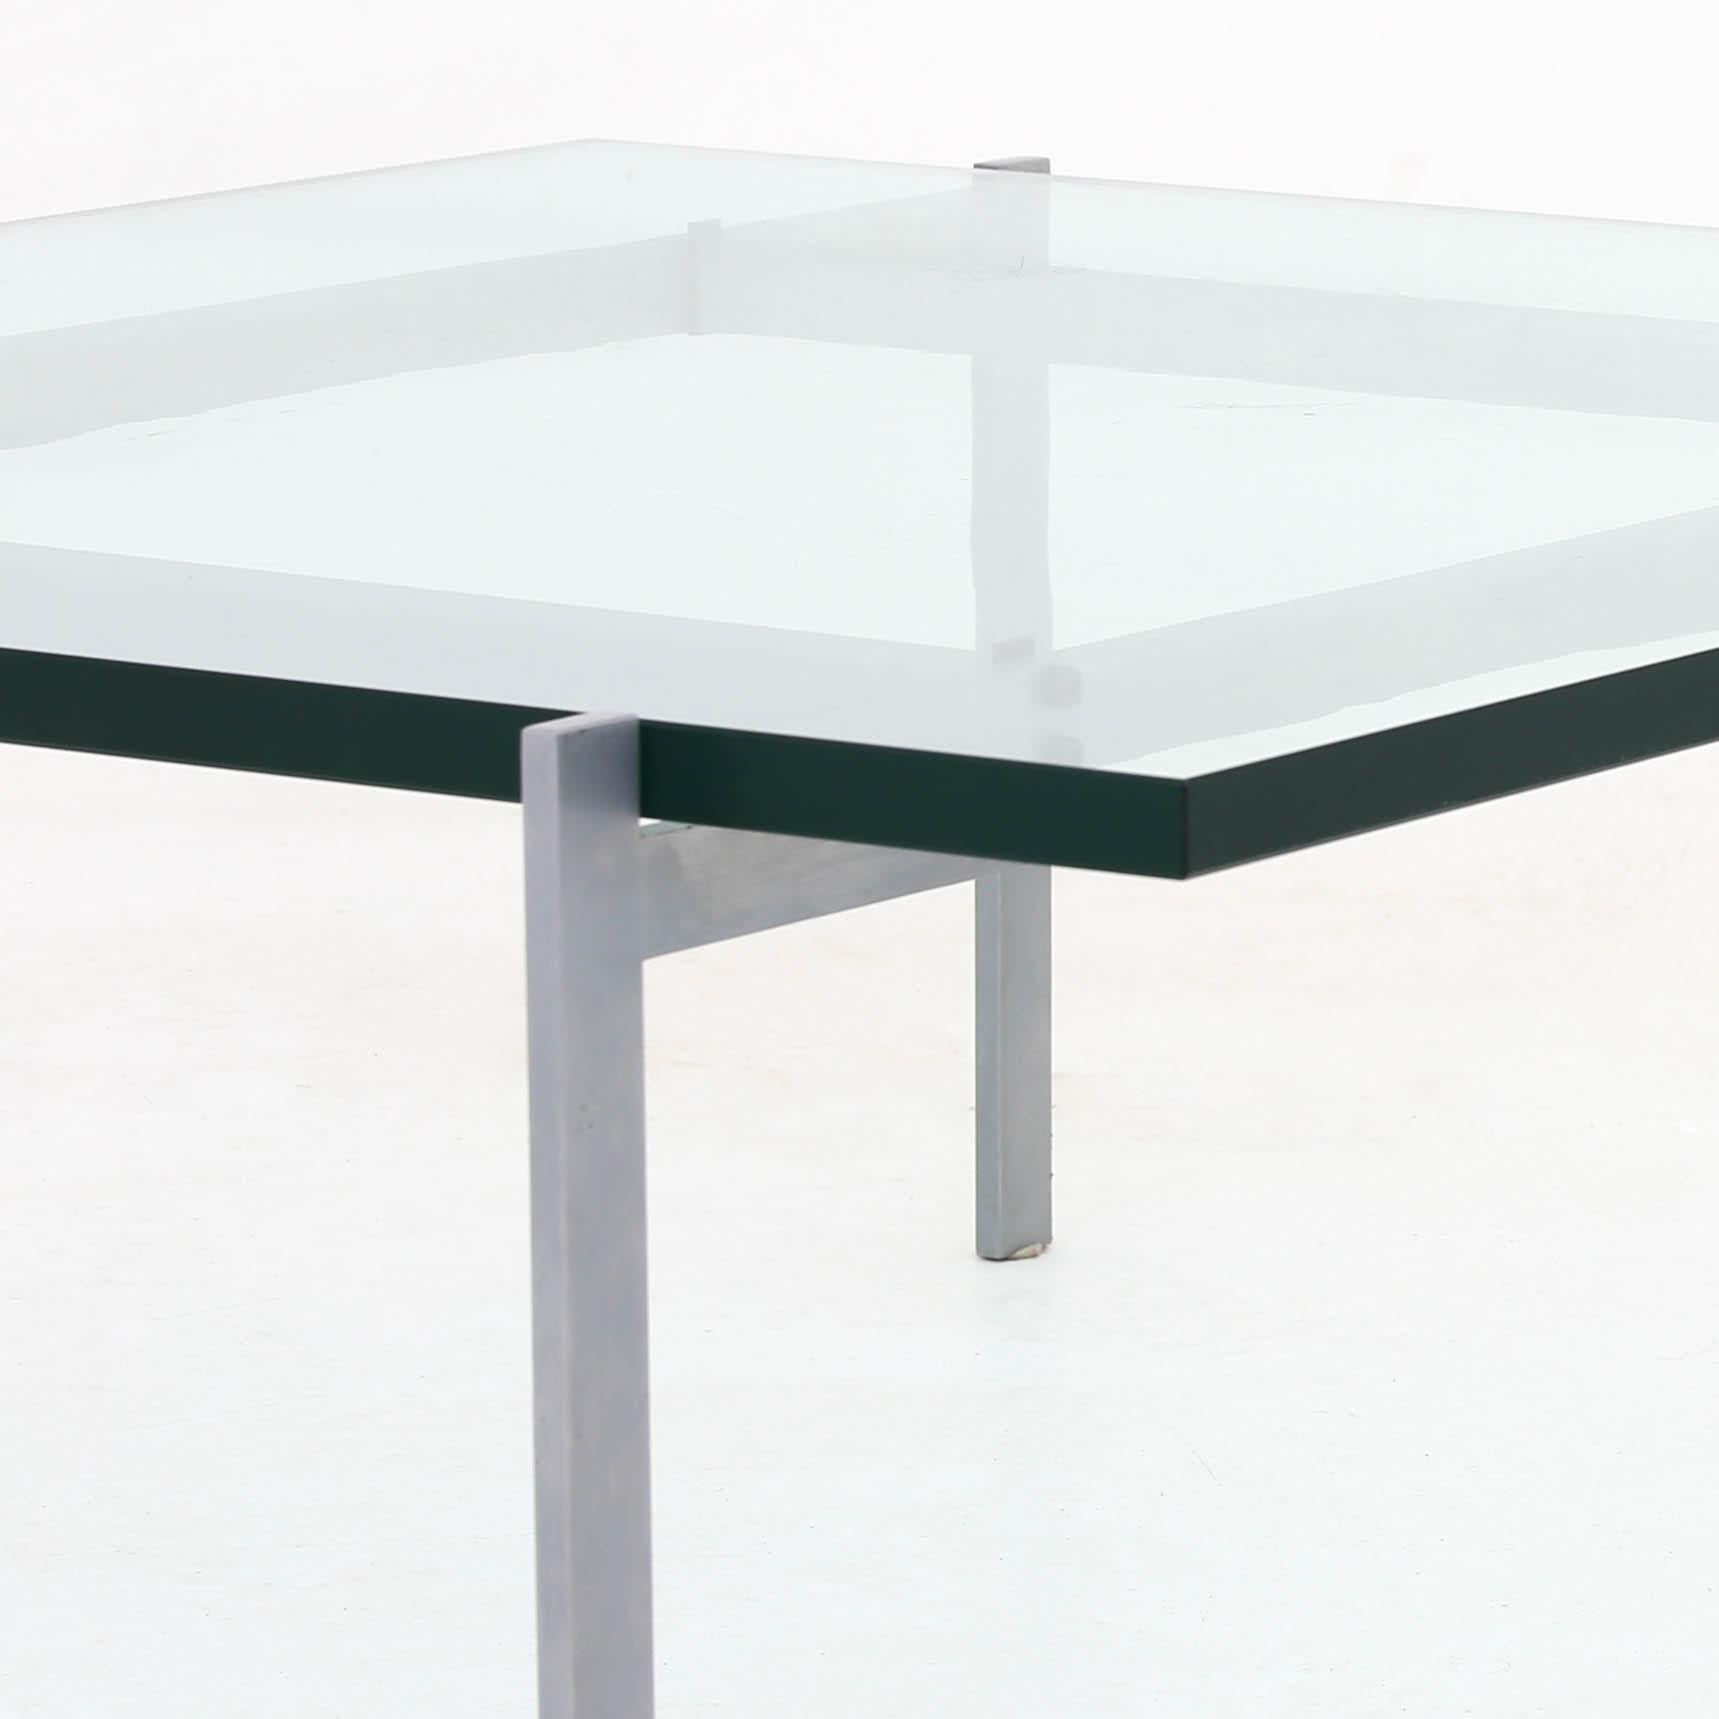 PK 61 - Coffee table w. glass top and frame of steel. Maker E. Kold Christensen.